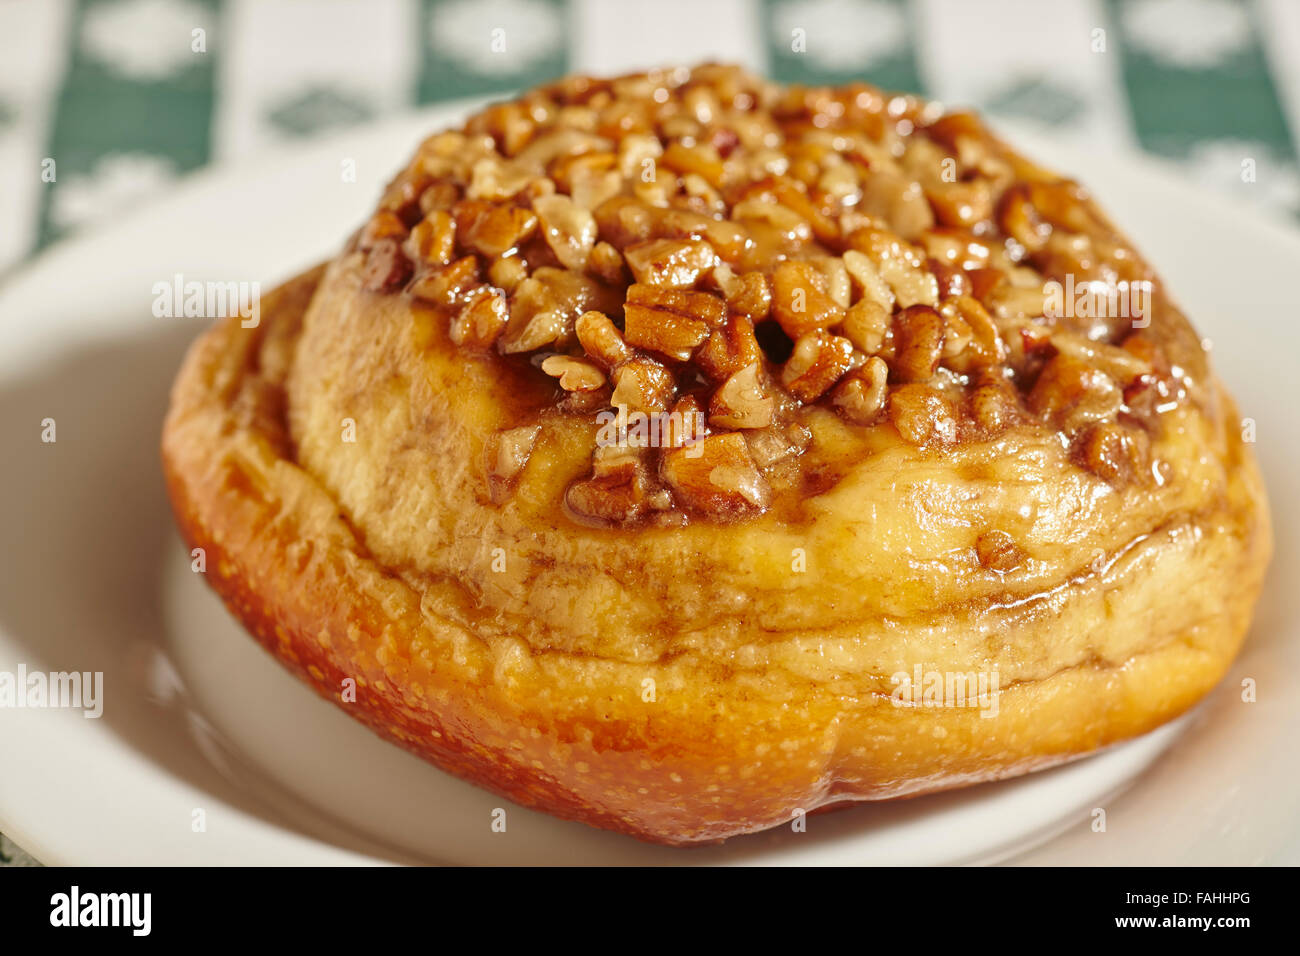 Sticky bun with nut topping Stock Photo